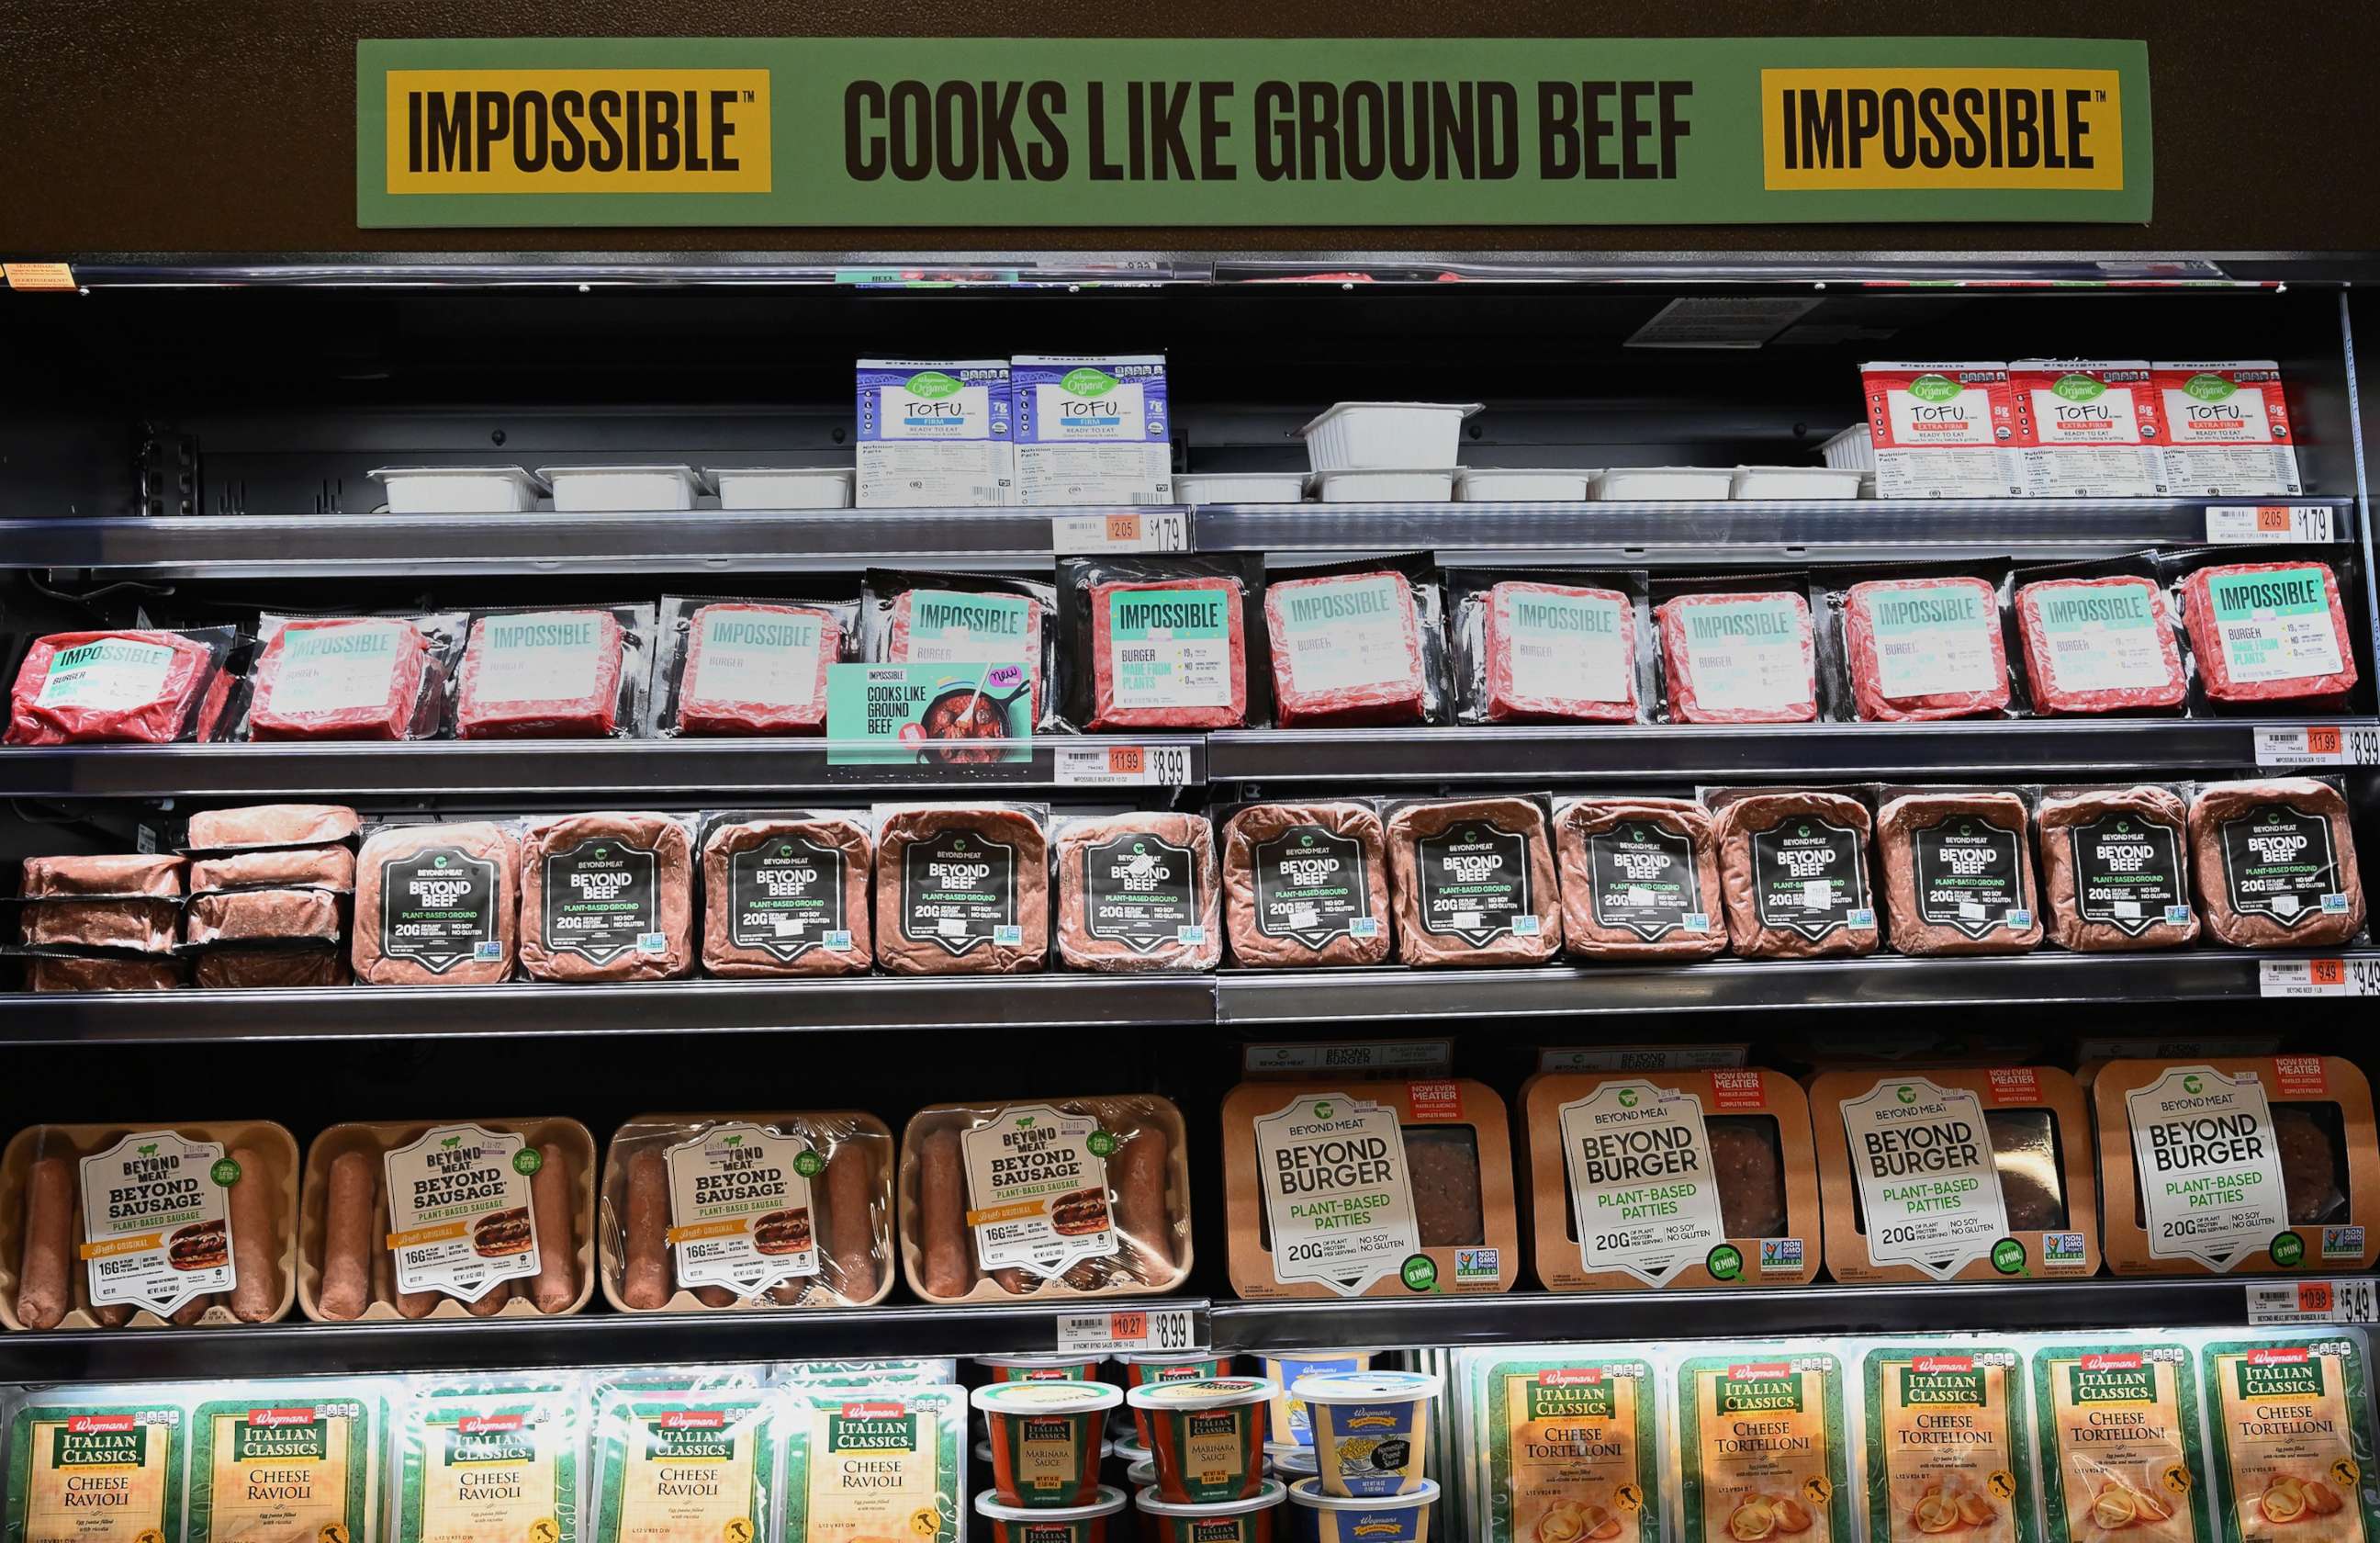 PHOTO: PPackages of "Impossible Foods" burgers and Beyond Meat made from plant-based substitutes for meat products for sale on Nov. 15, 2019 in New York City.